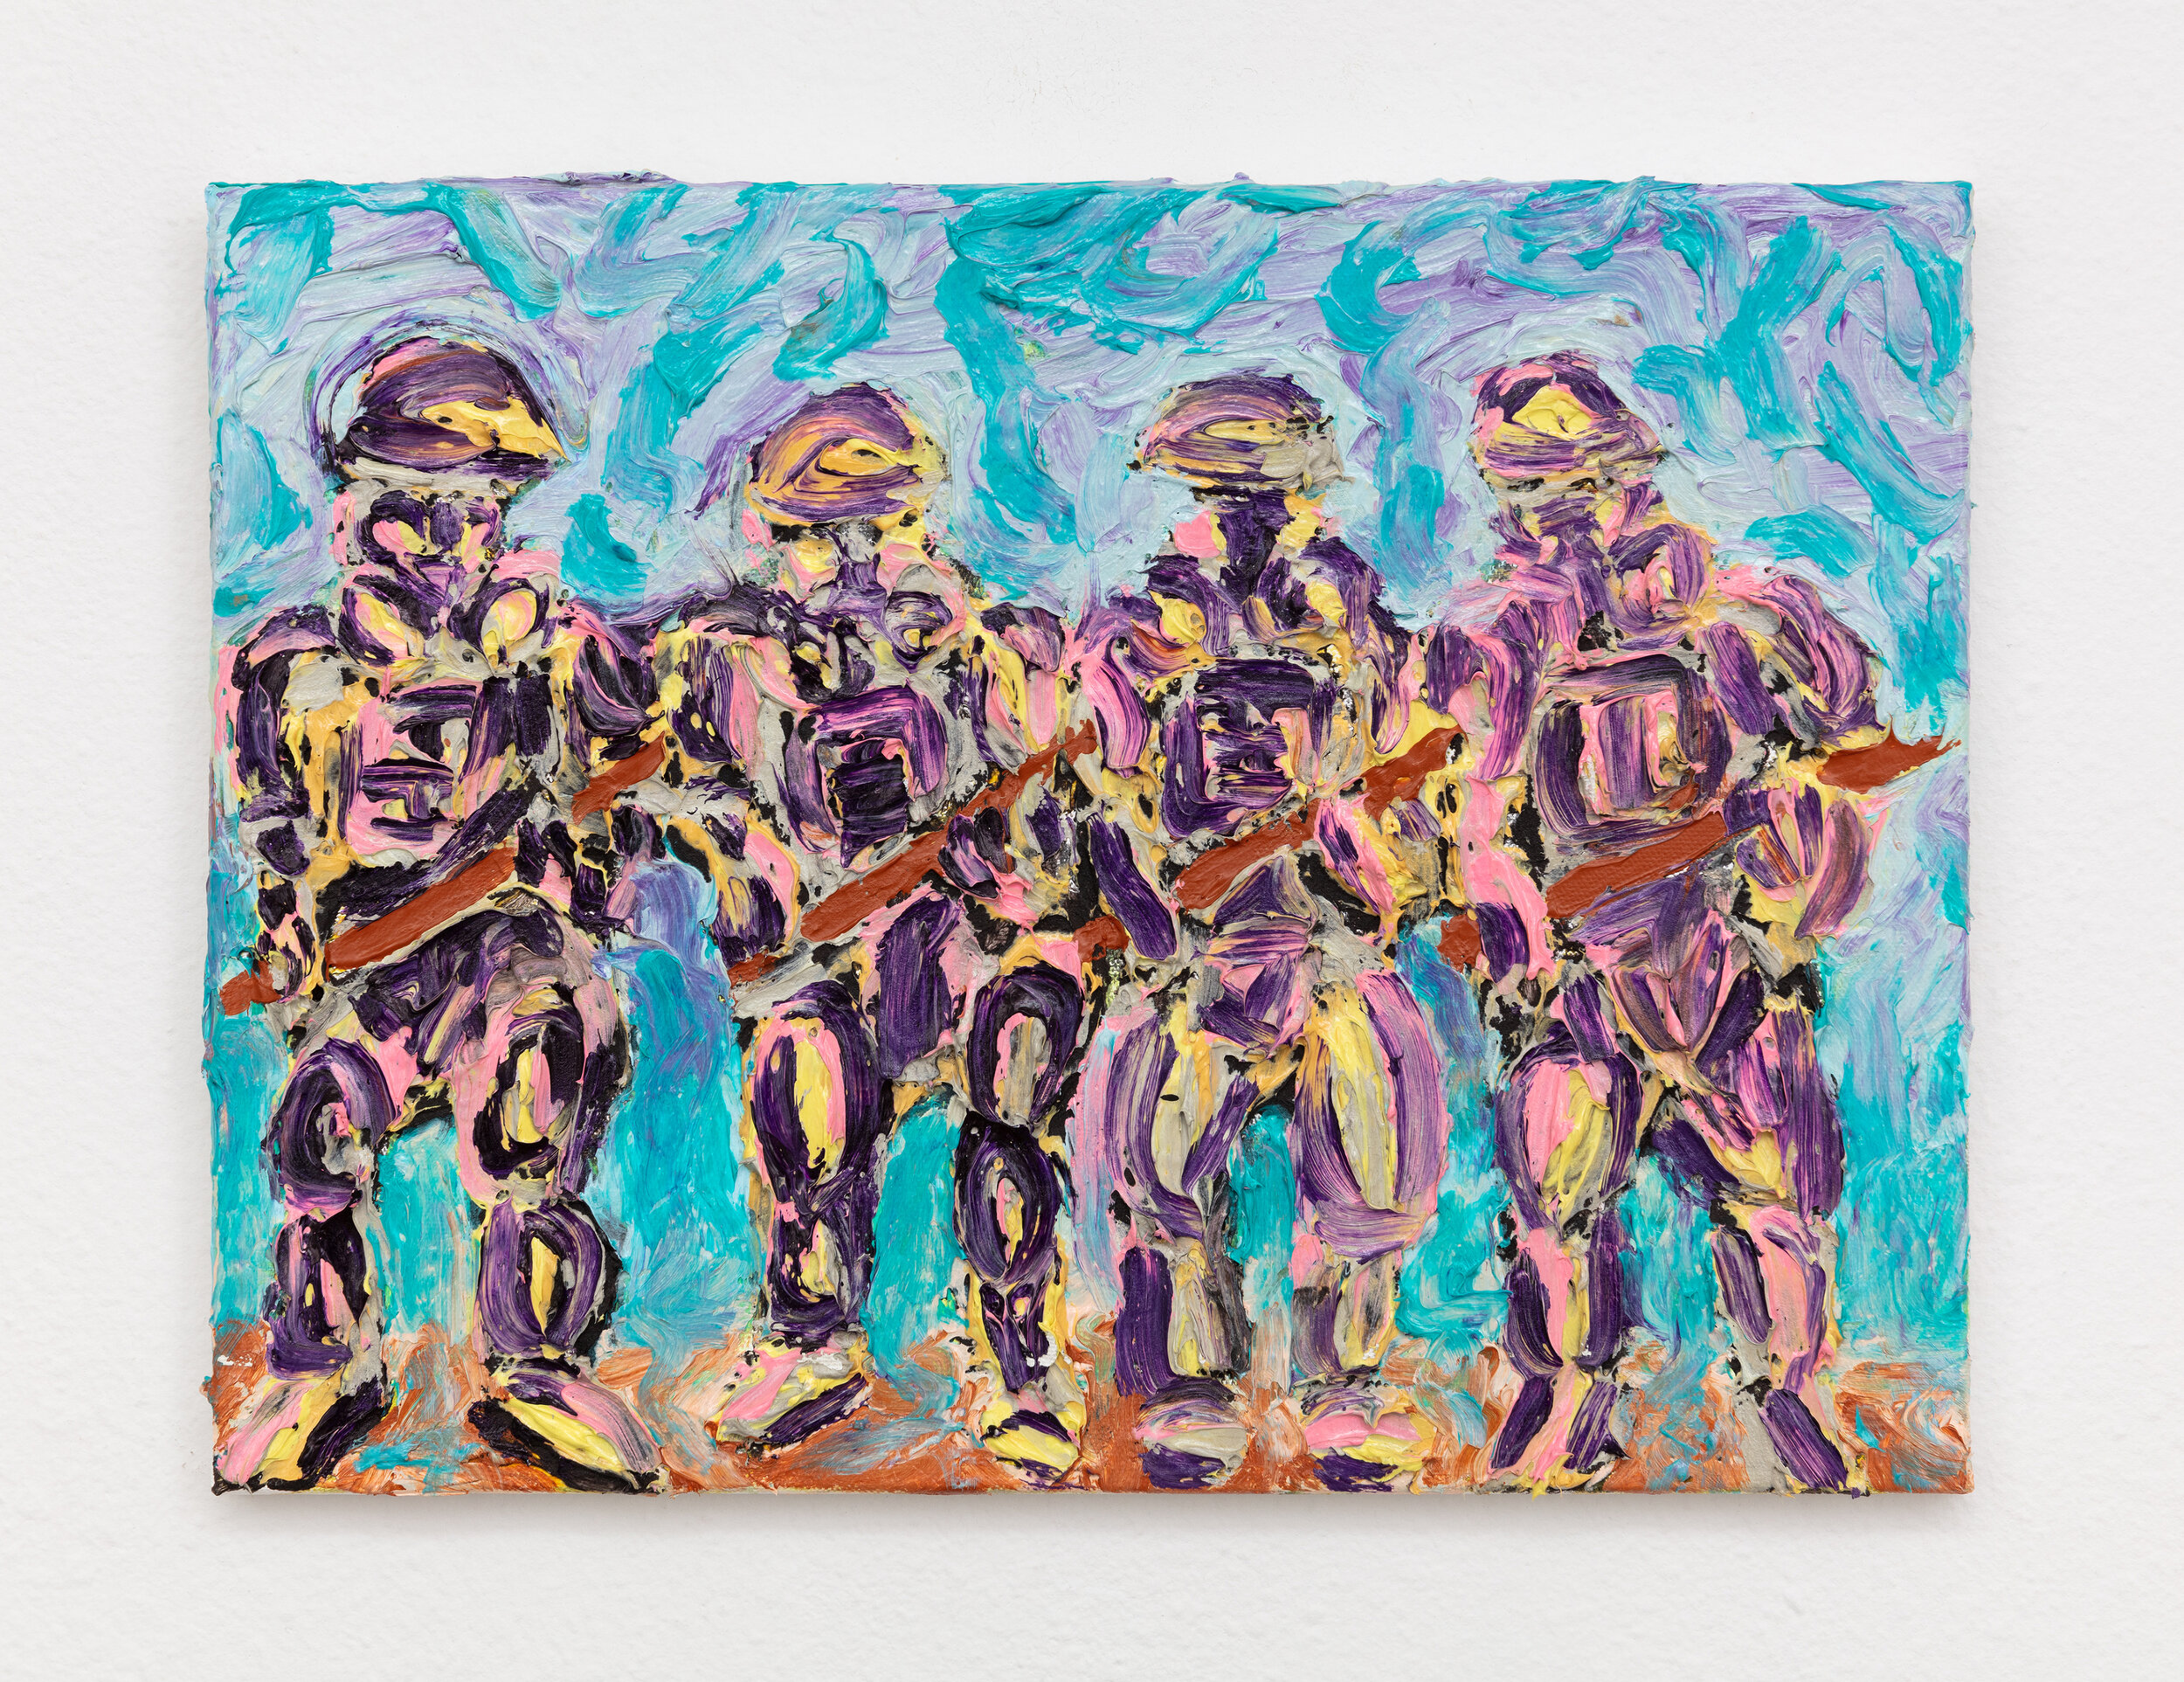   Alex Nguyen-Vo   Officers Emerging From Tear Gas  July 2018 Acrylic on canvas 8 x 10 inches 